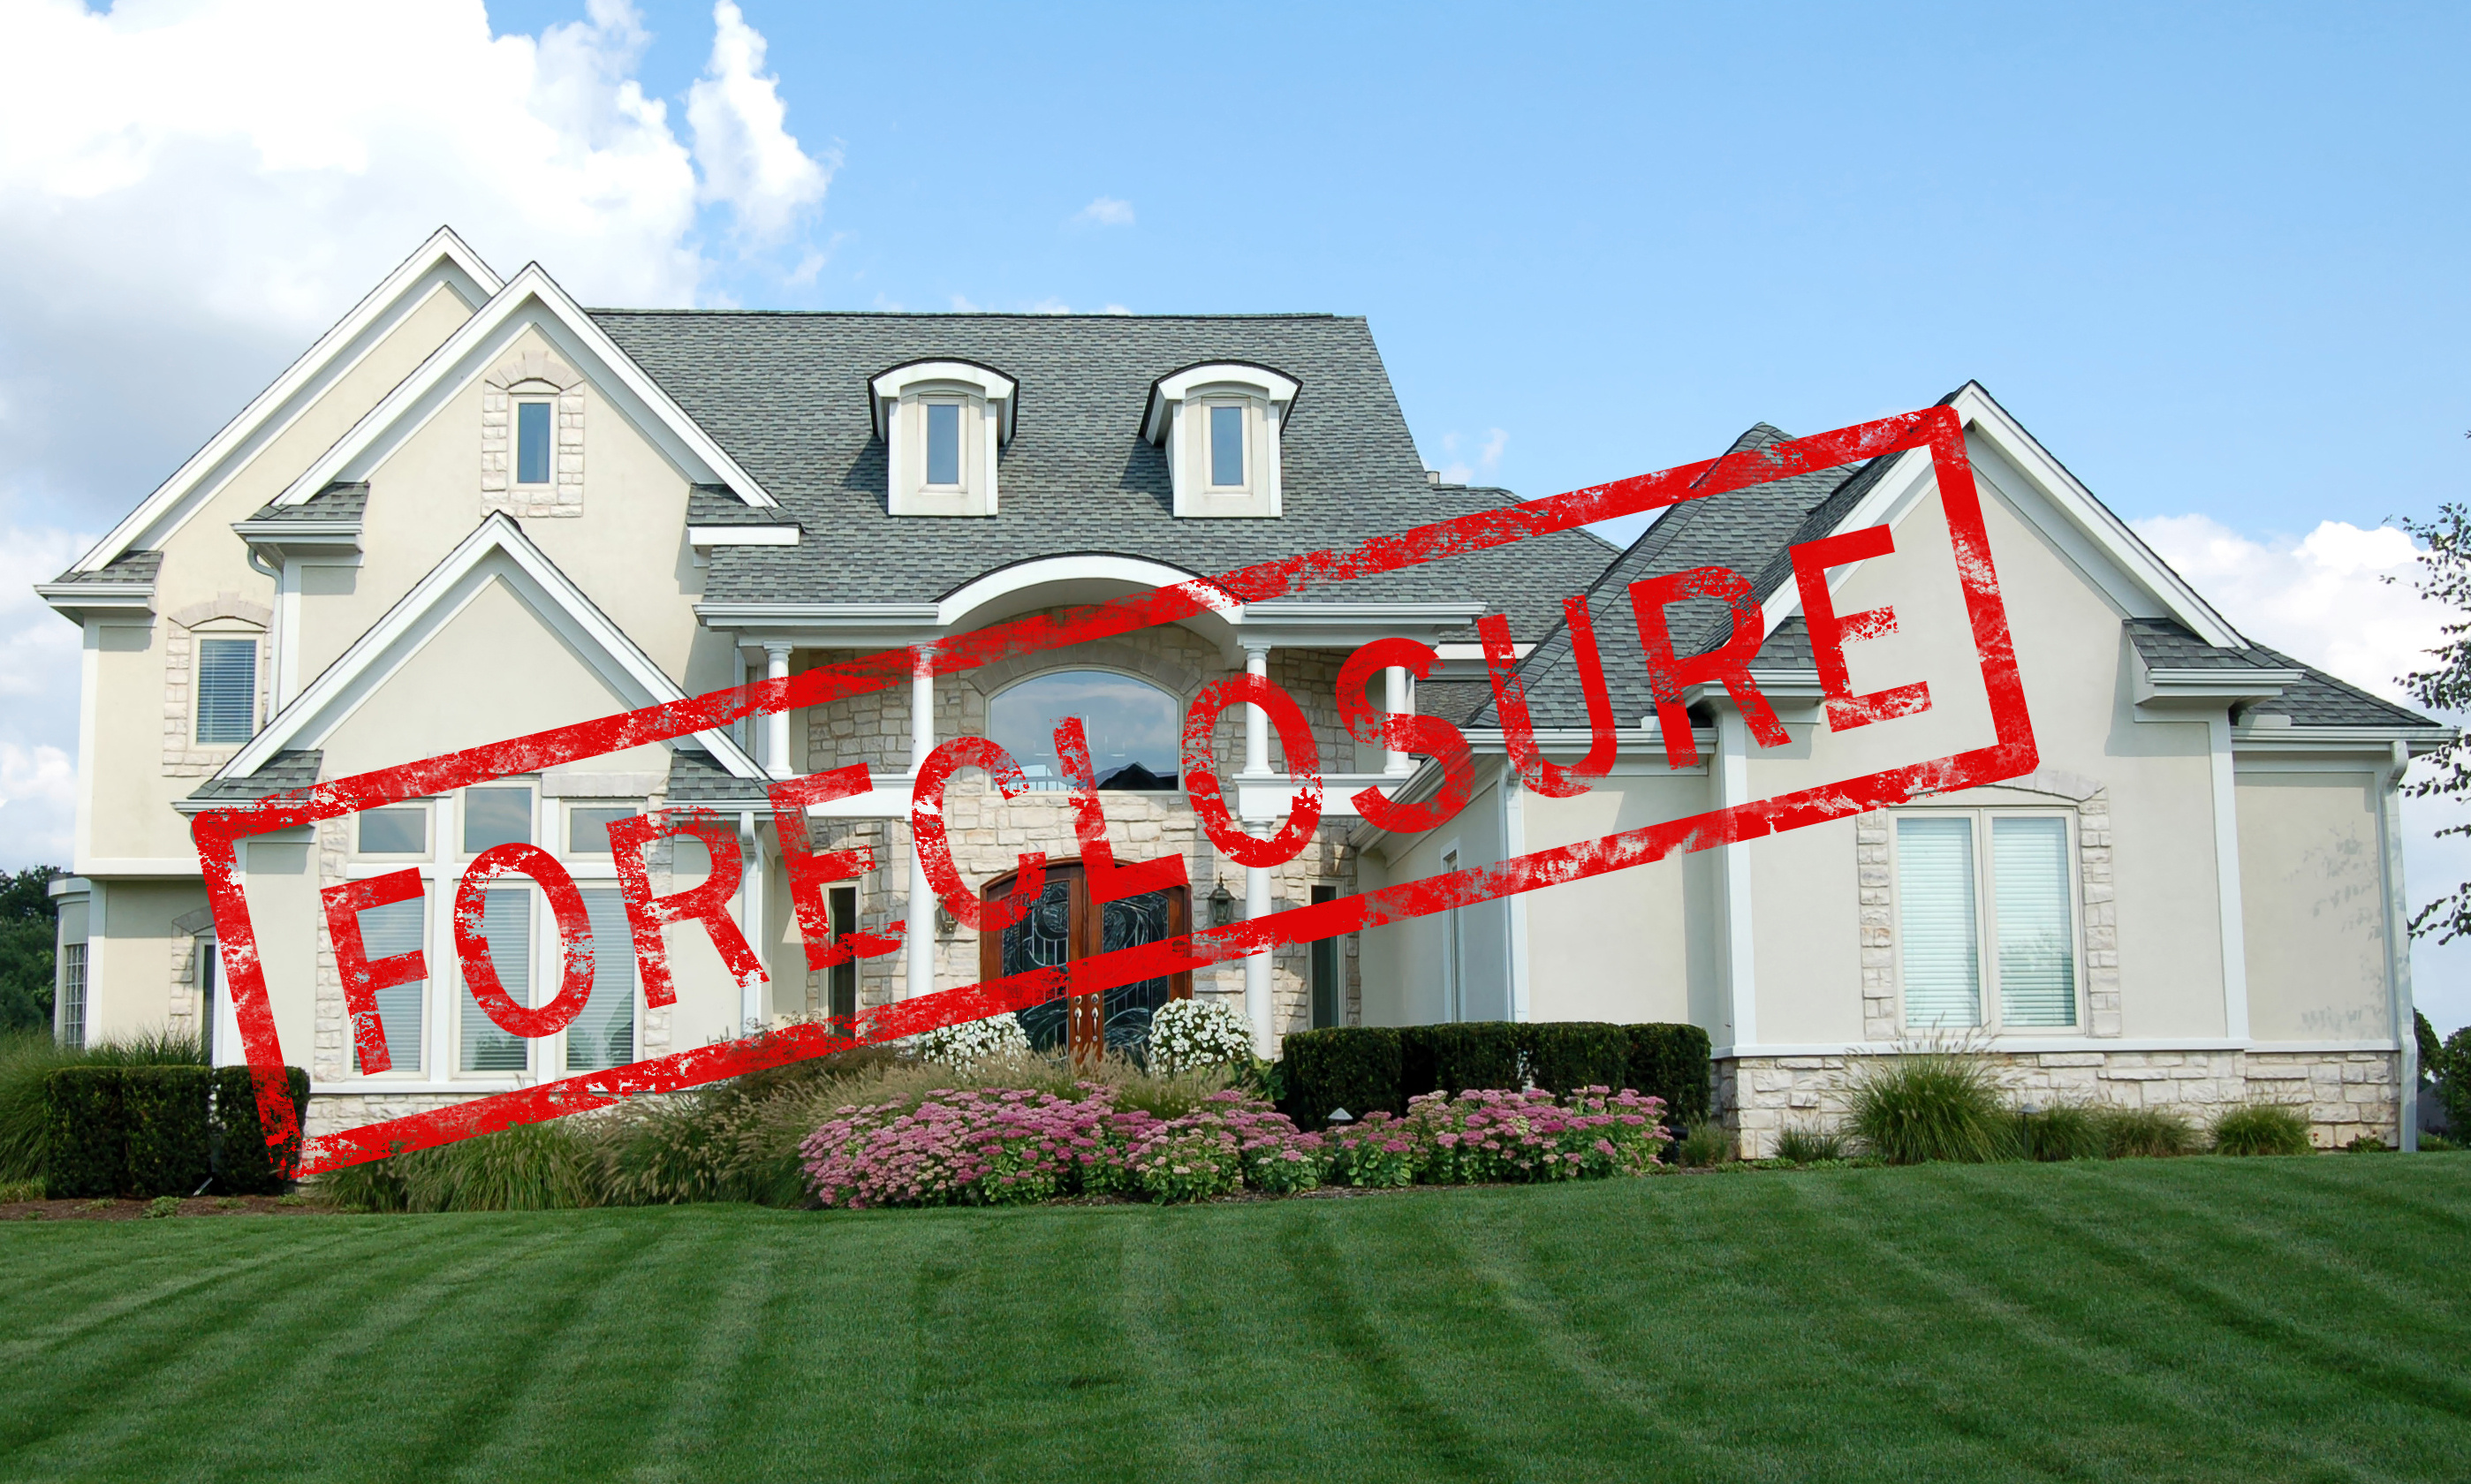 Call ValPro Appraisal LLC to discuss valuations on Lee foreclosures